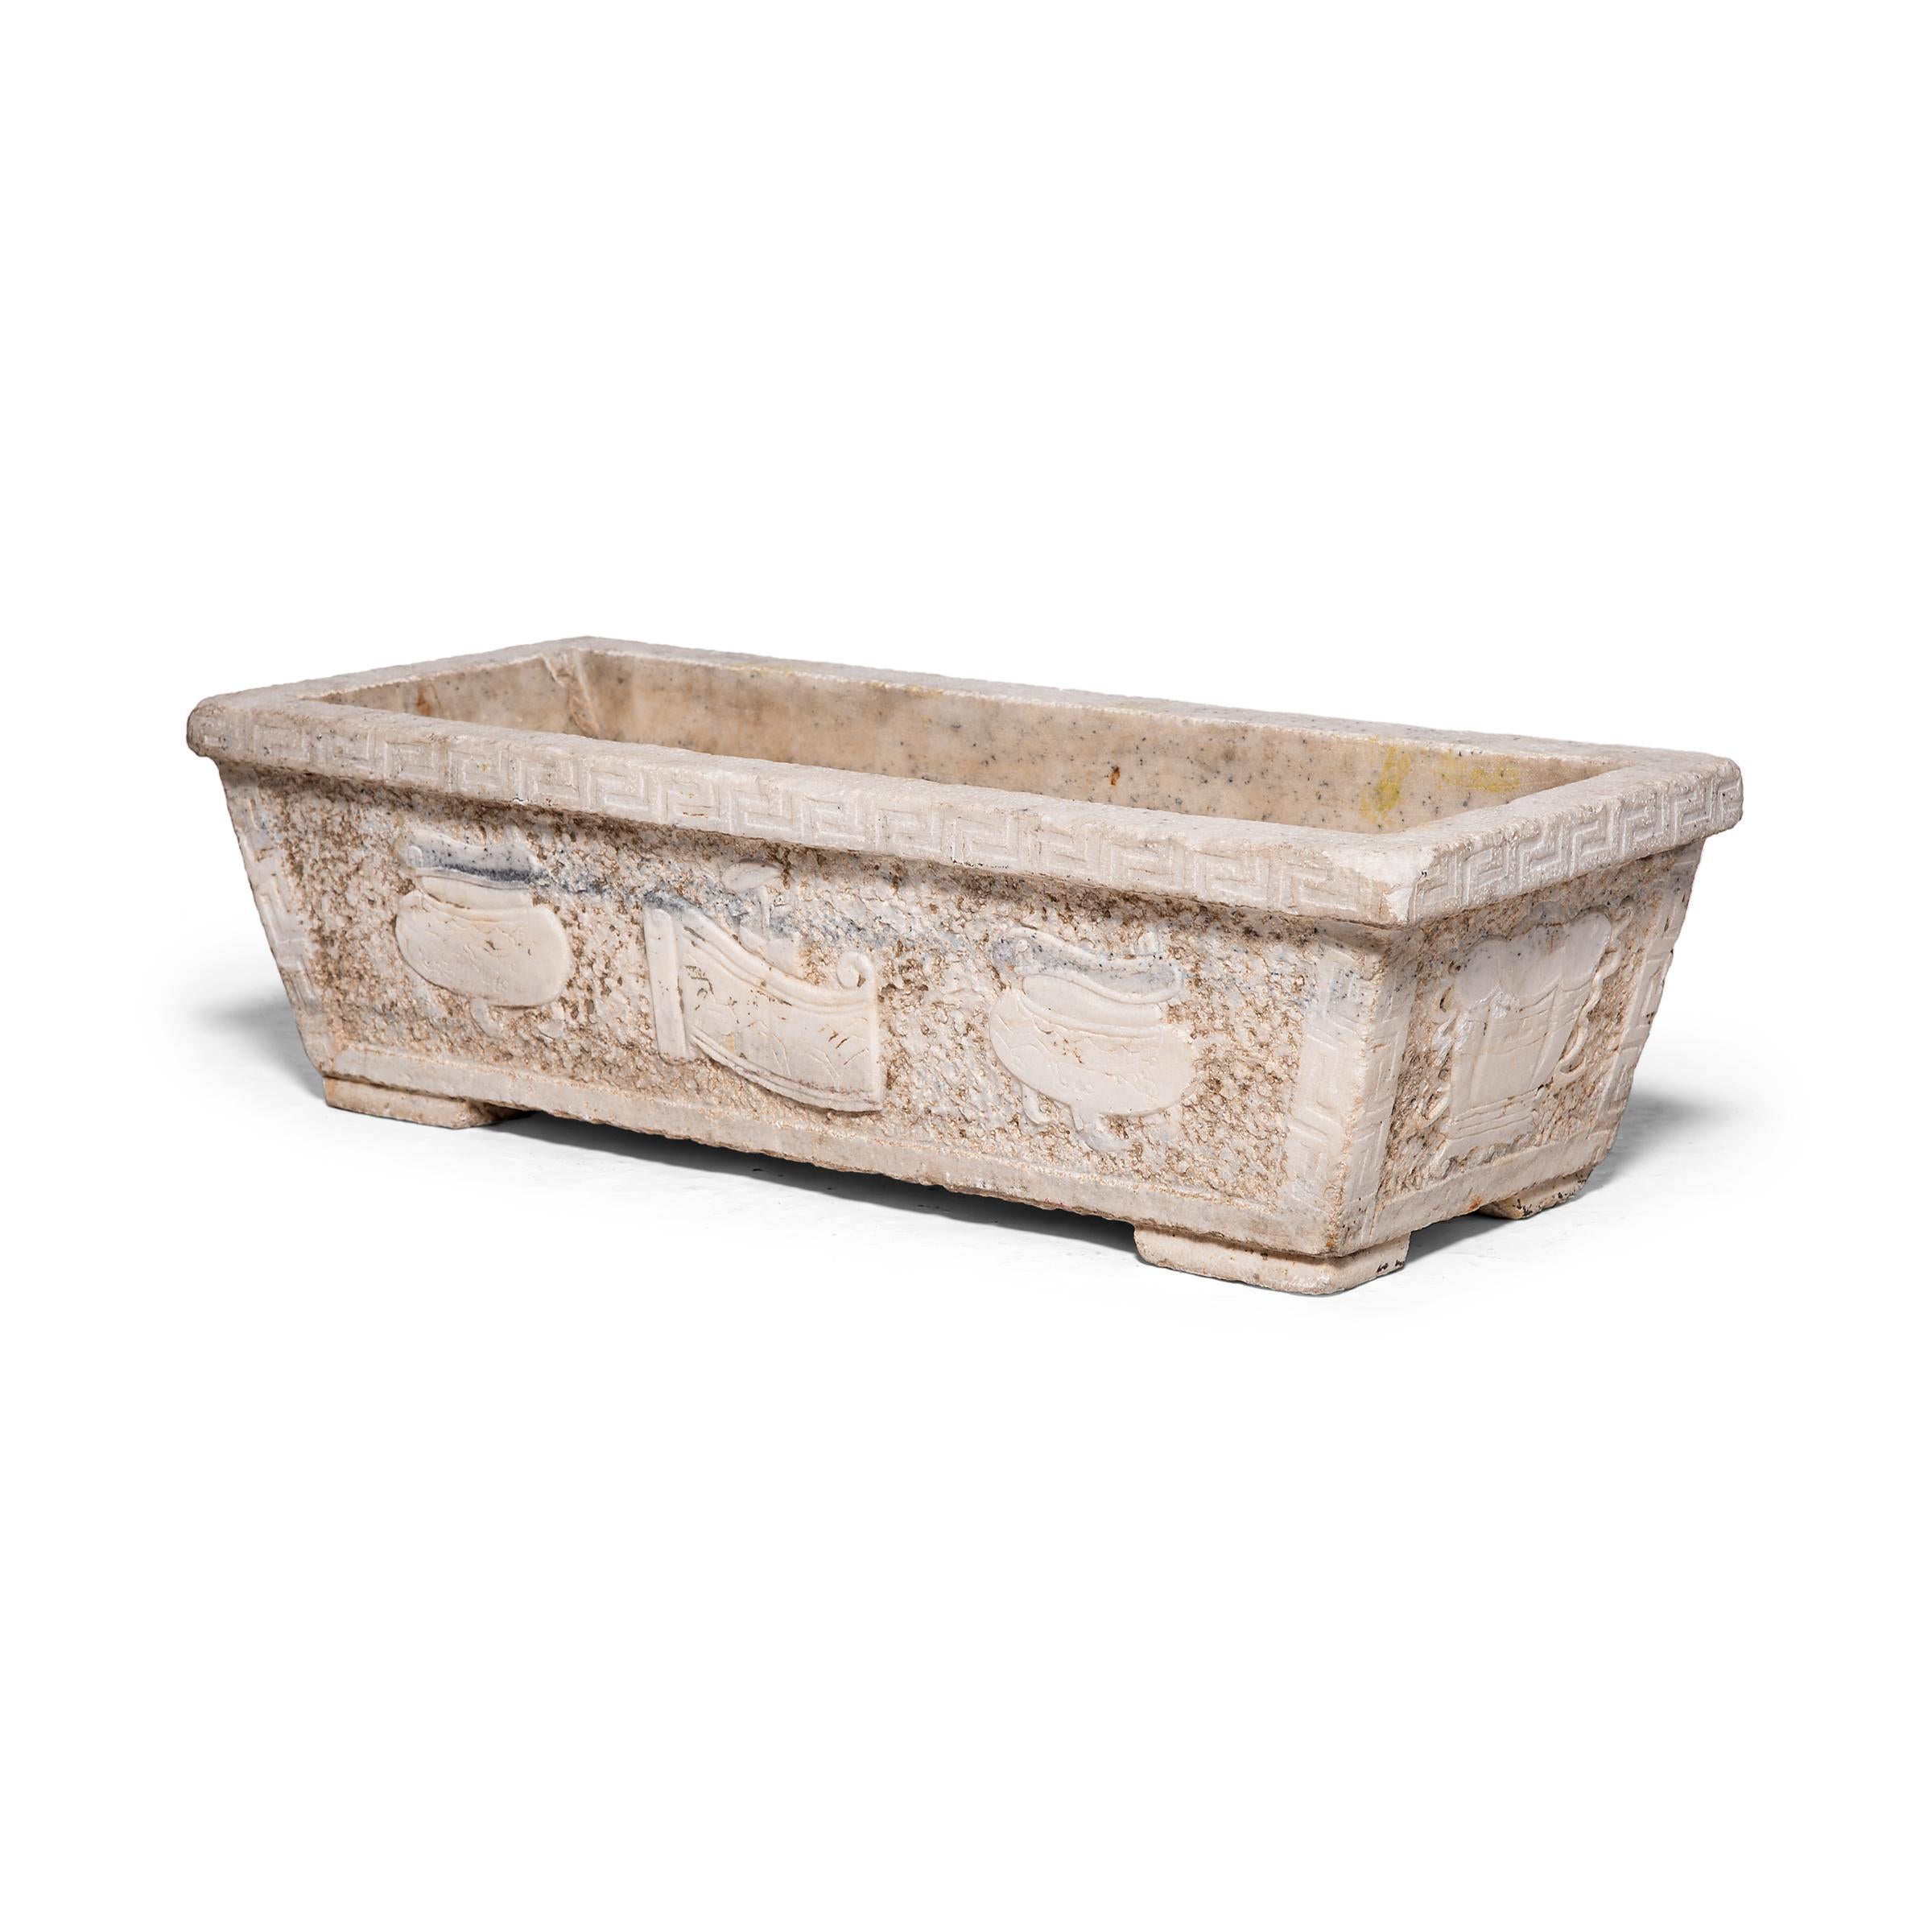 In 18th century China, a trough would have been a fairly common site in rural areas of Shanxi province. However, this marble trough, with its intricately carved decoration and patterned border, is unusually ornate and likely once sat in the